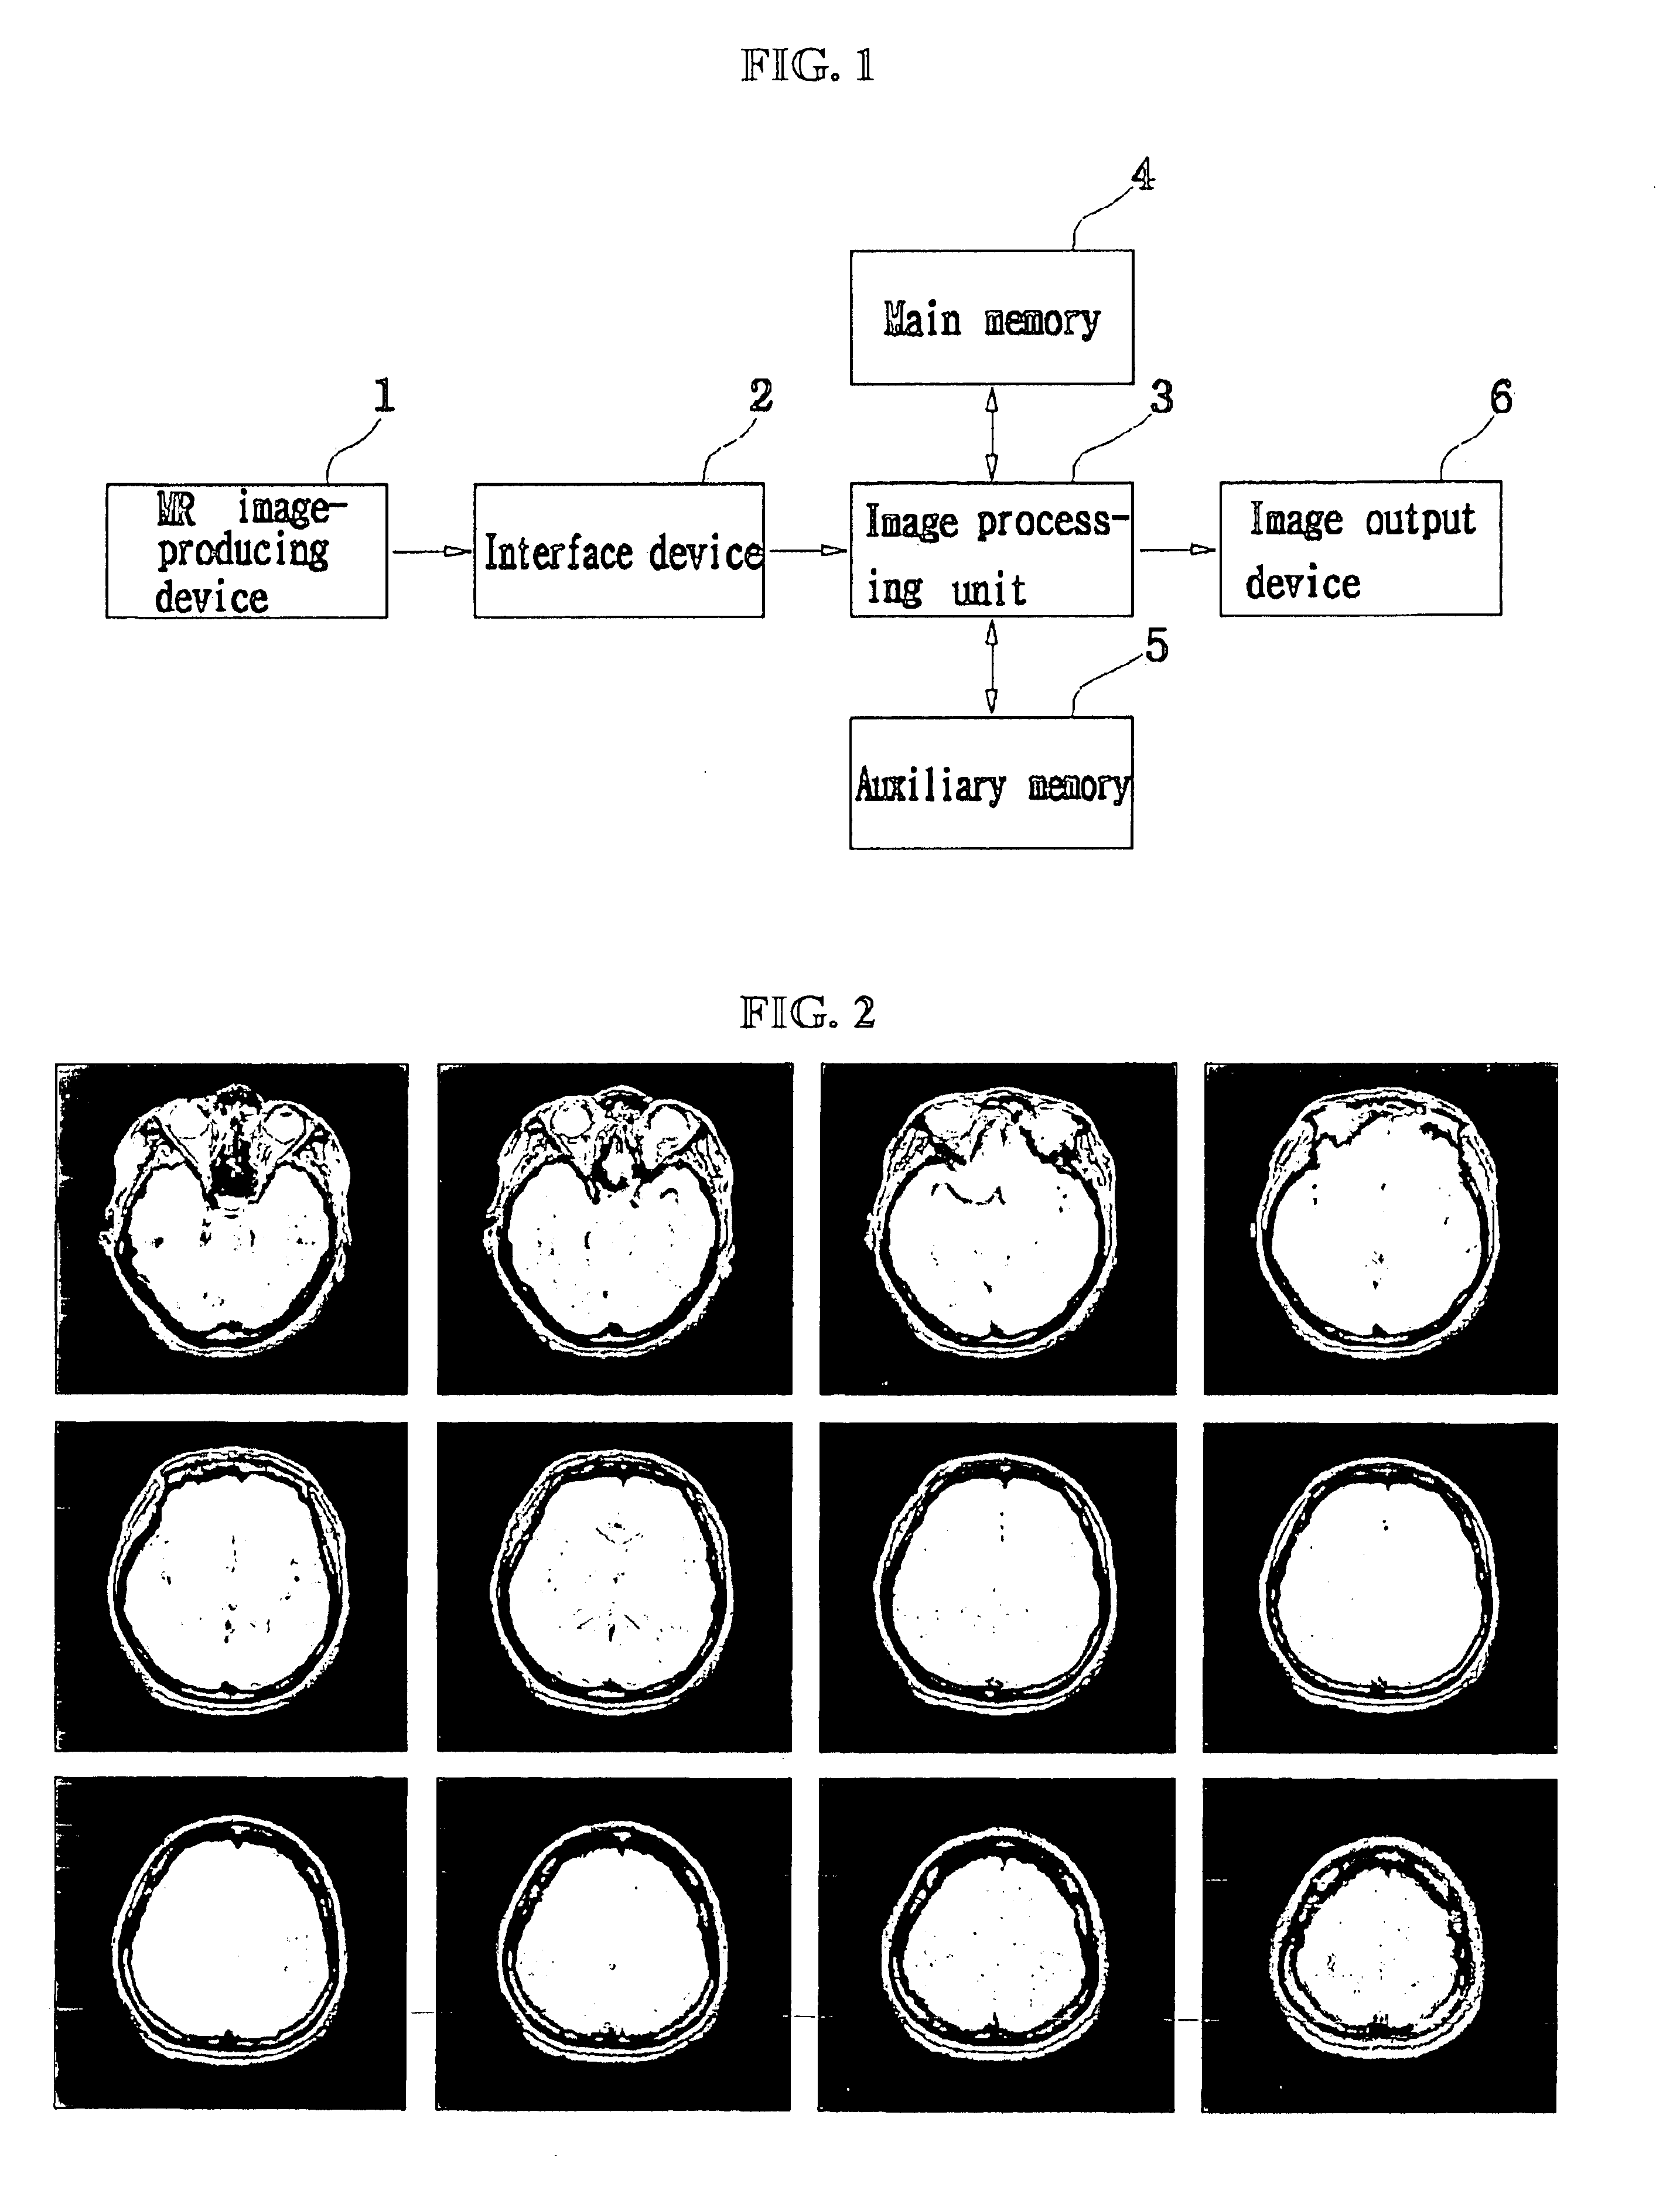 Method for segmentation and volume calculation of white matter, gray matter, and cerebral spinal fluid using magnetic resonance images of the human brain